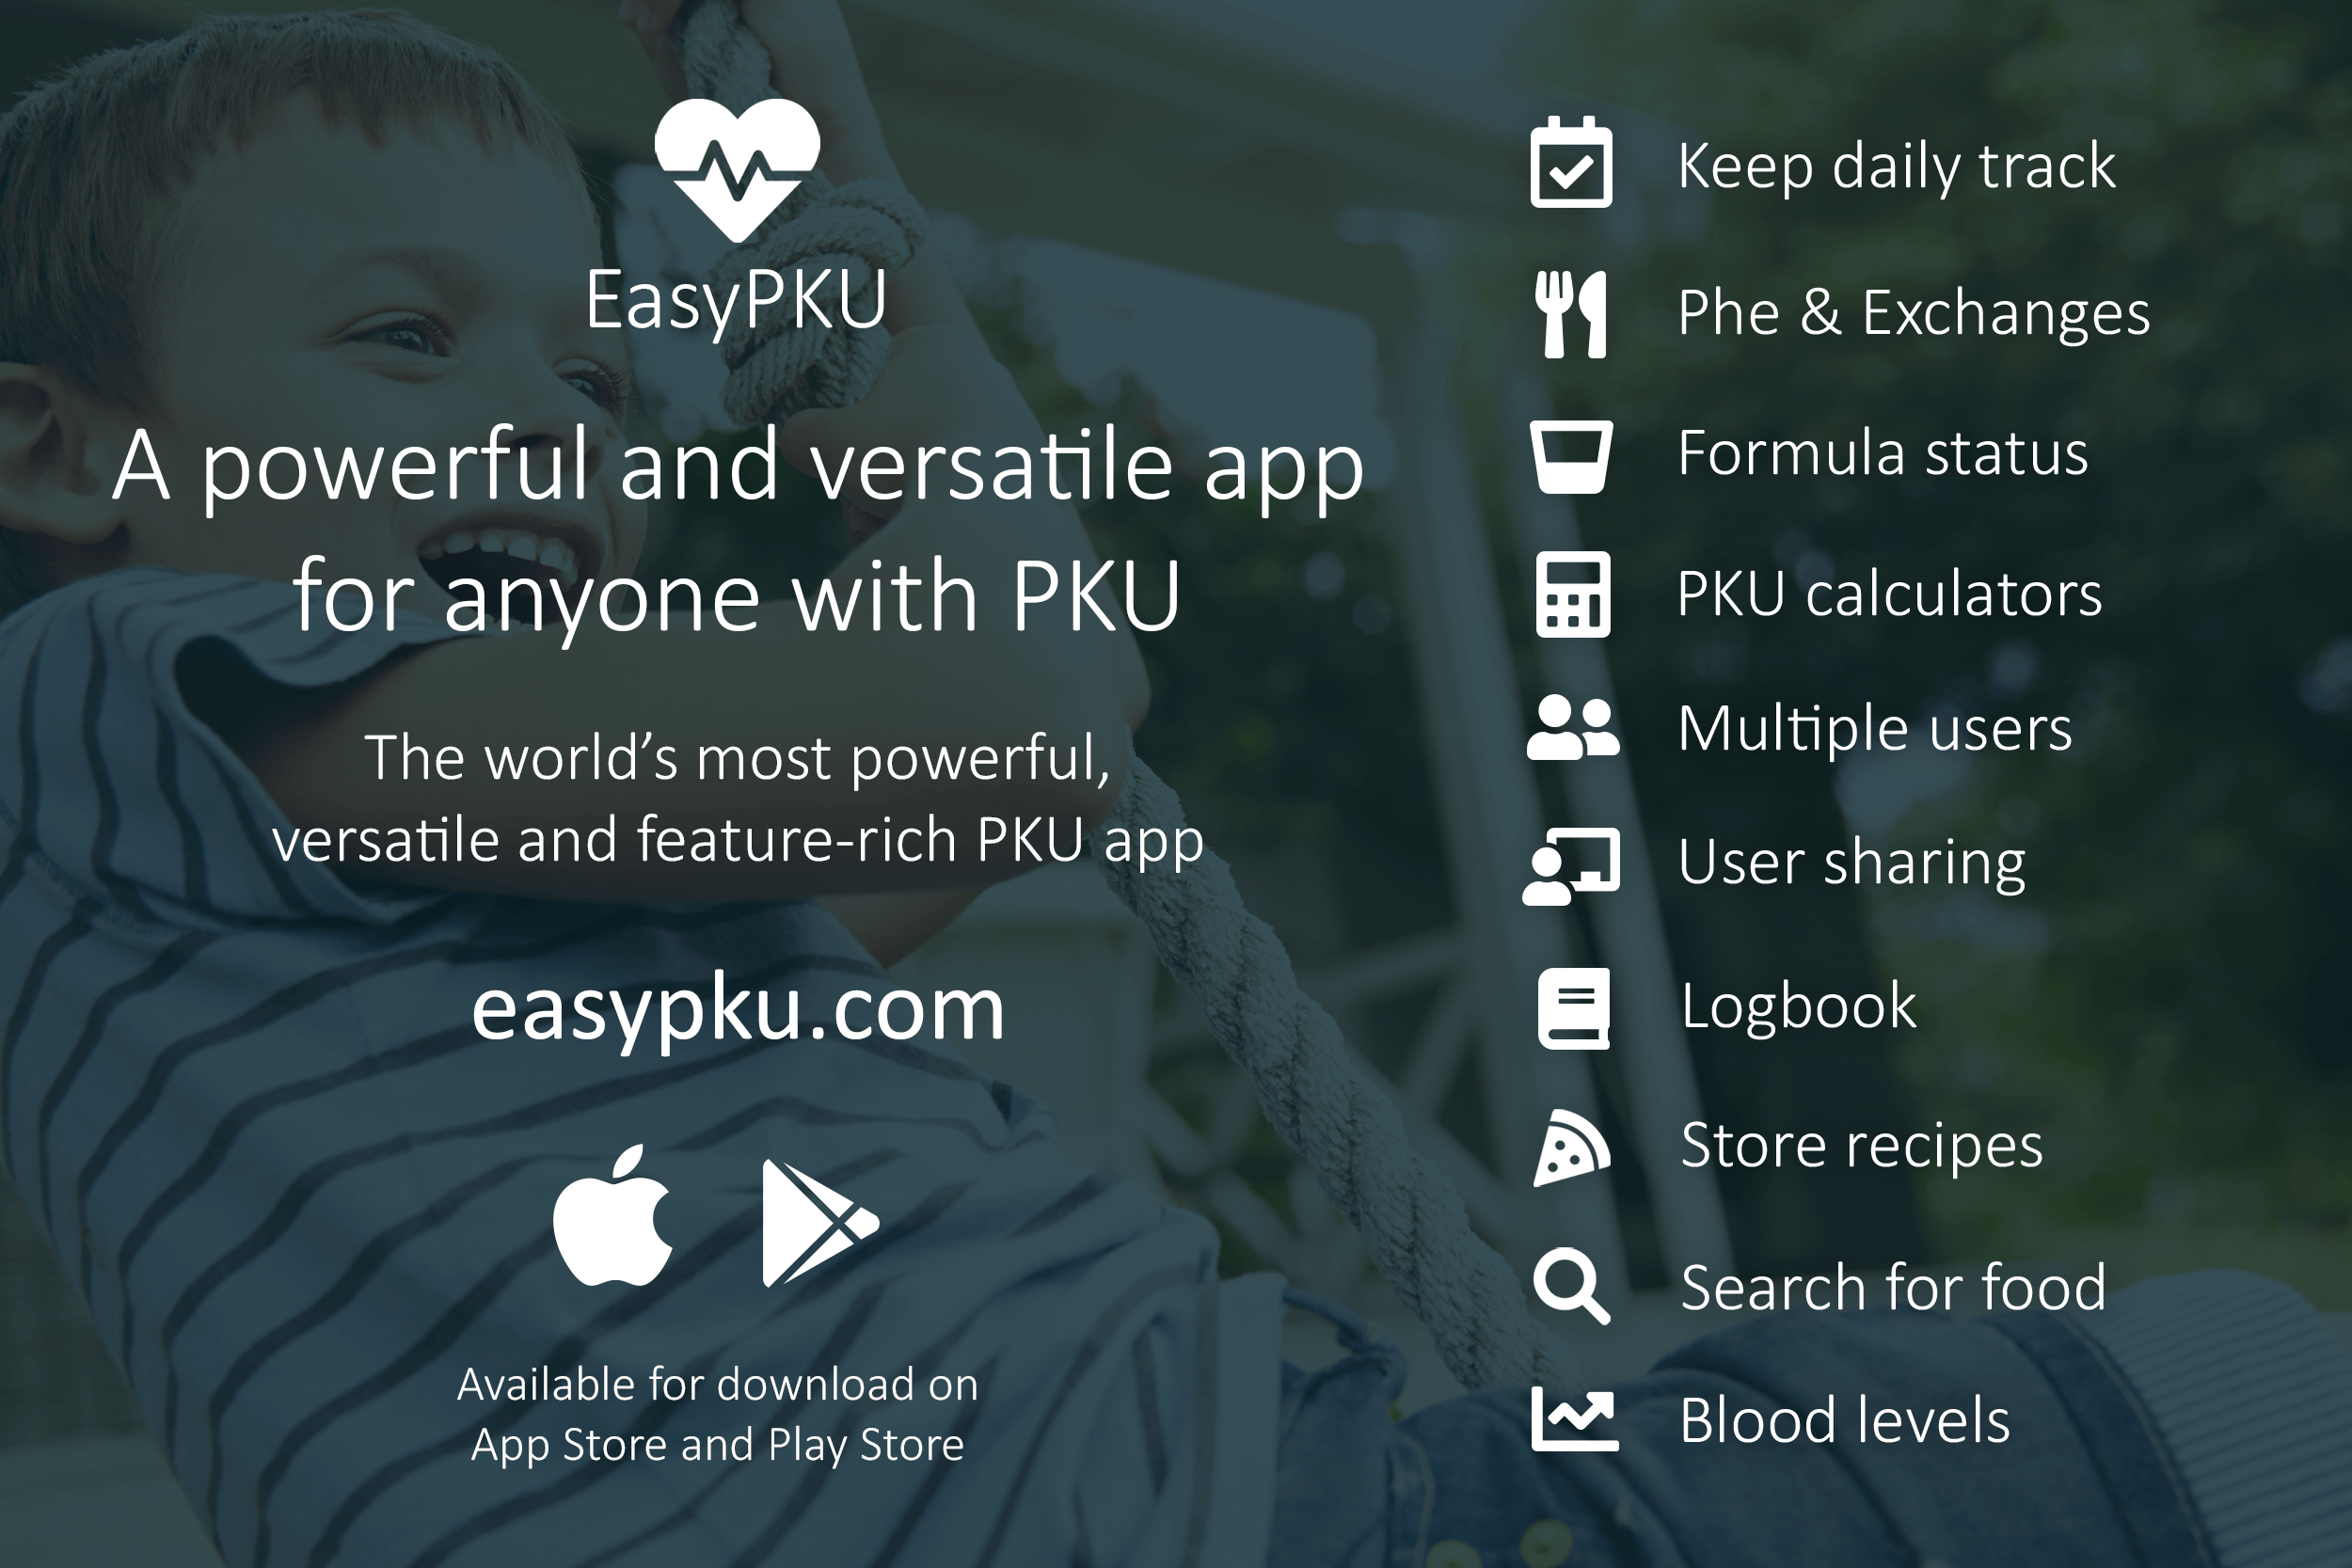 EasyPKU - The world’s most powerful, versatile and feature-rich PKU app